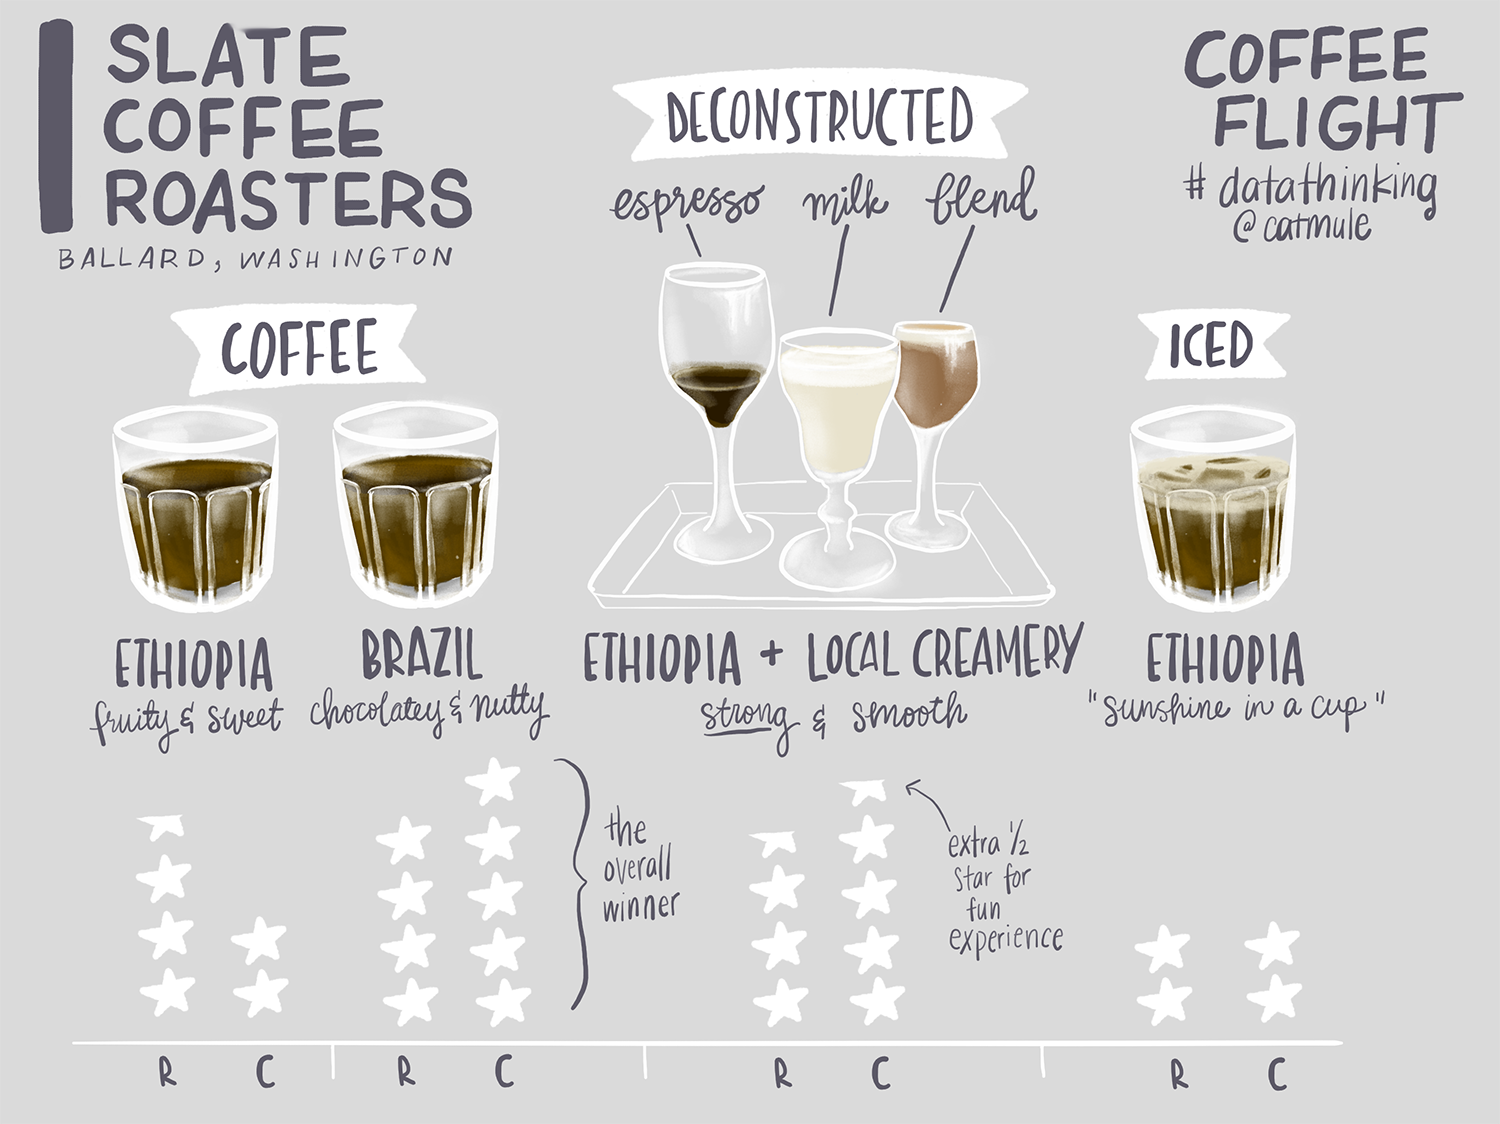  Captured during a coffee flight sample tasting at Slate Coffee Roasters during travels to Seattle 